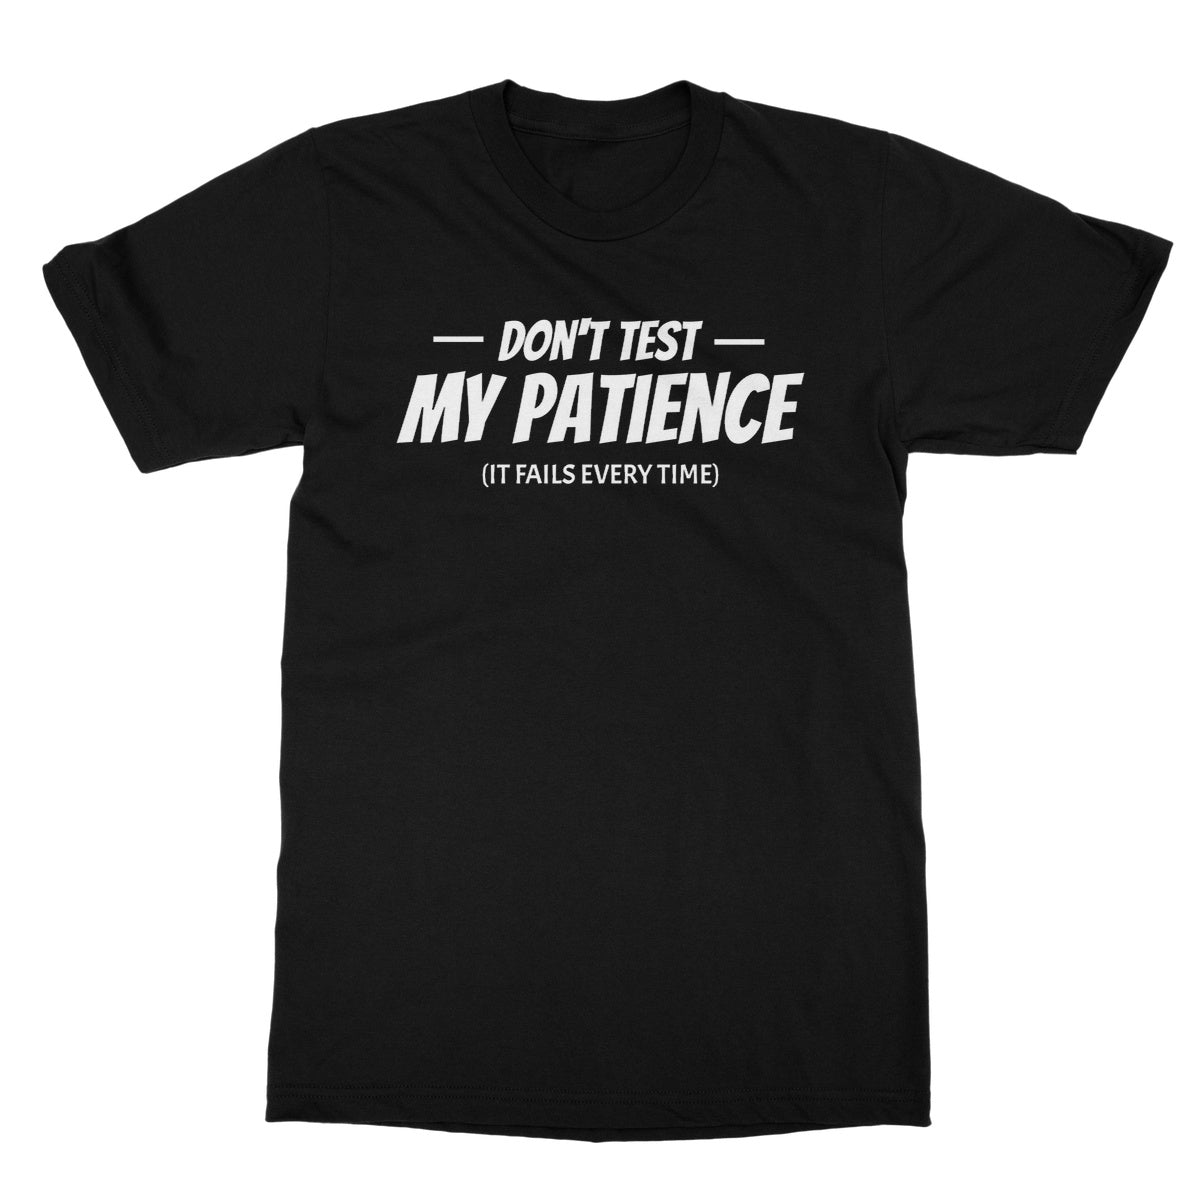 do not test my patience t shirt black